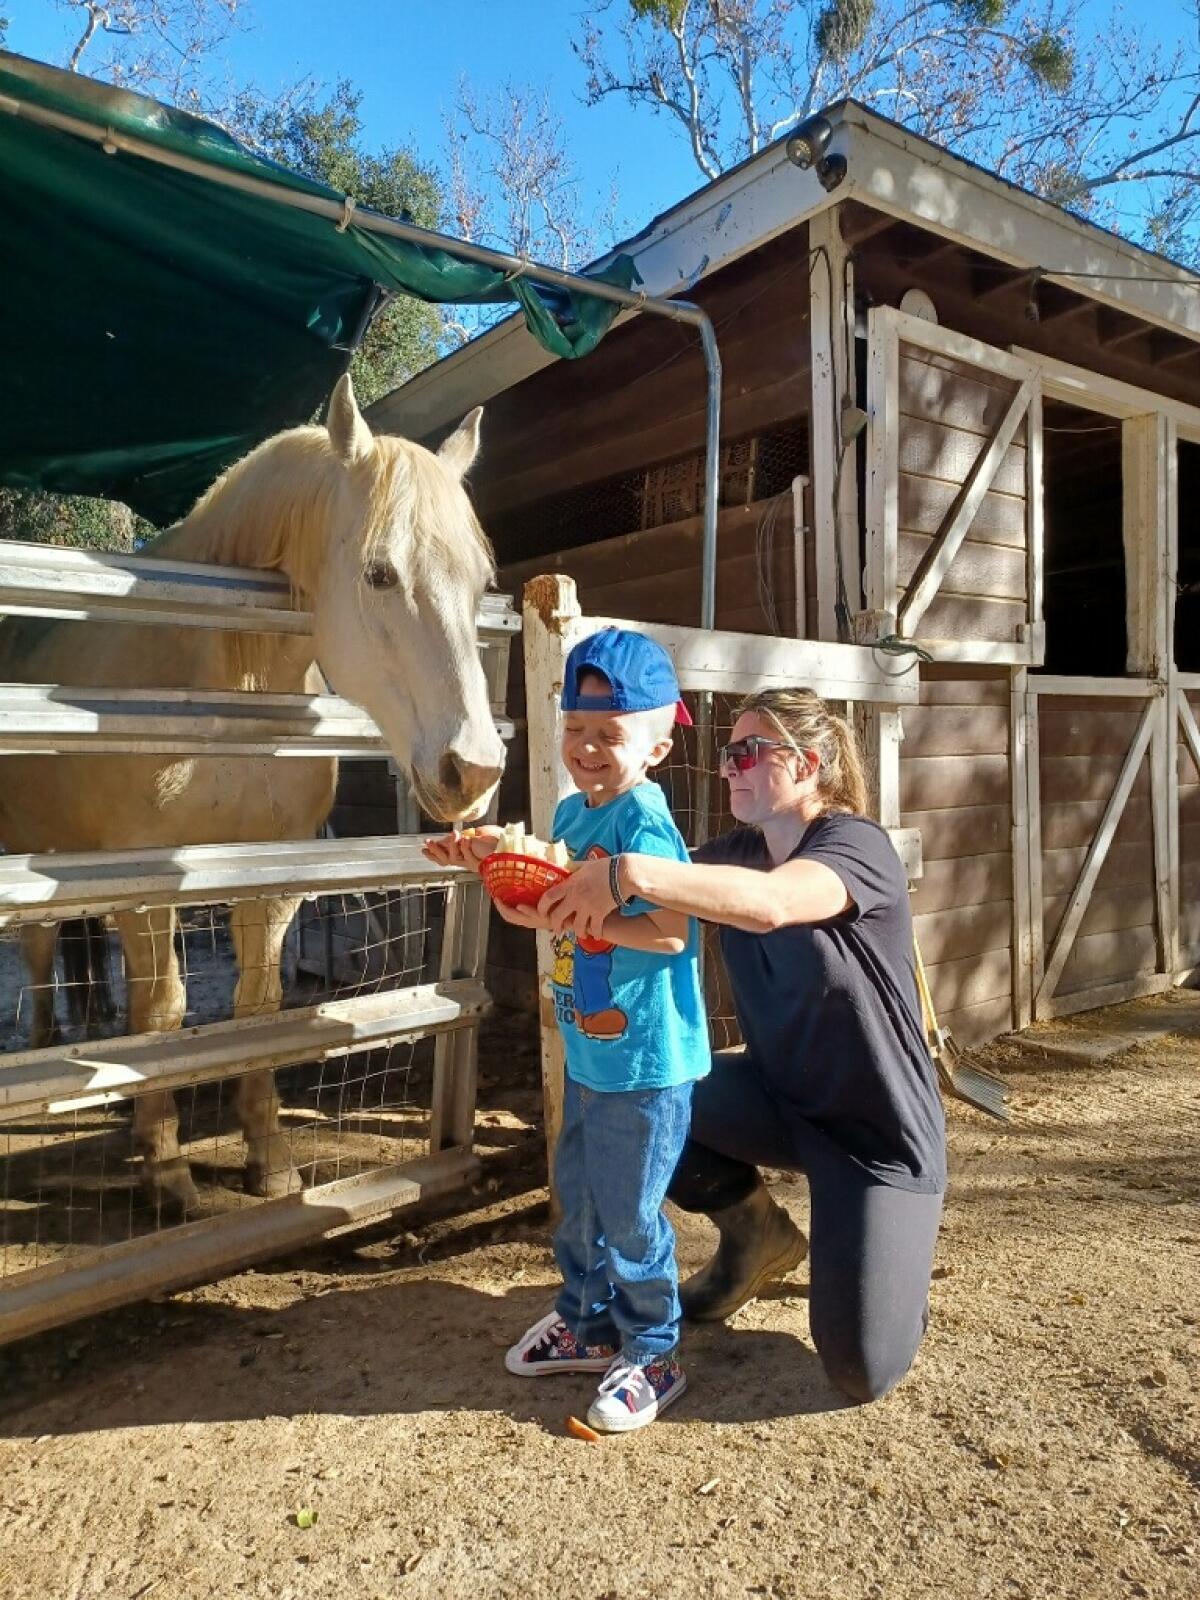 Five-year-old Evan Pennington feeds a horse with Danielle Judd's help at FarmHouse Rescue.